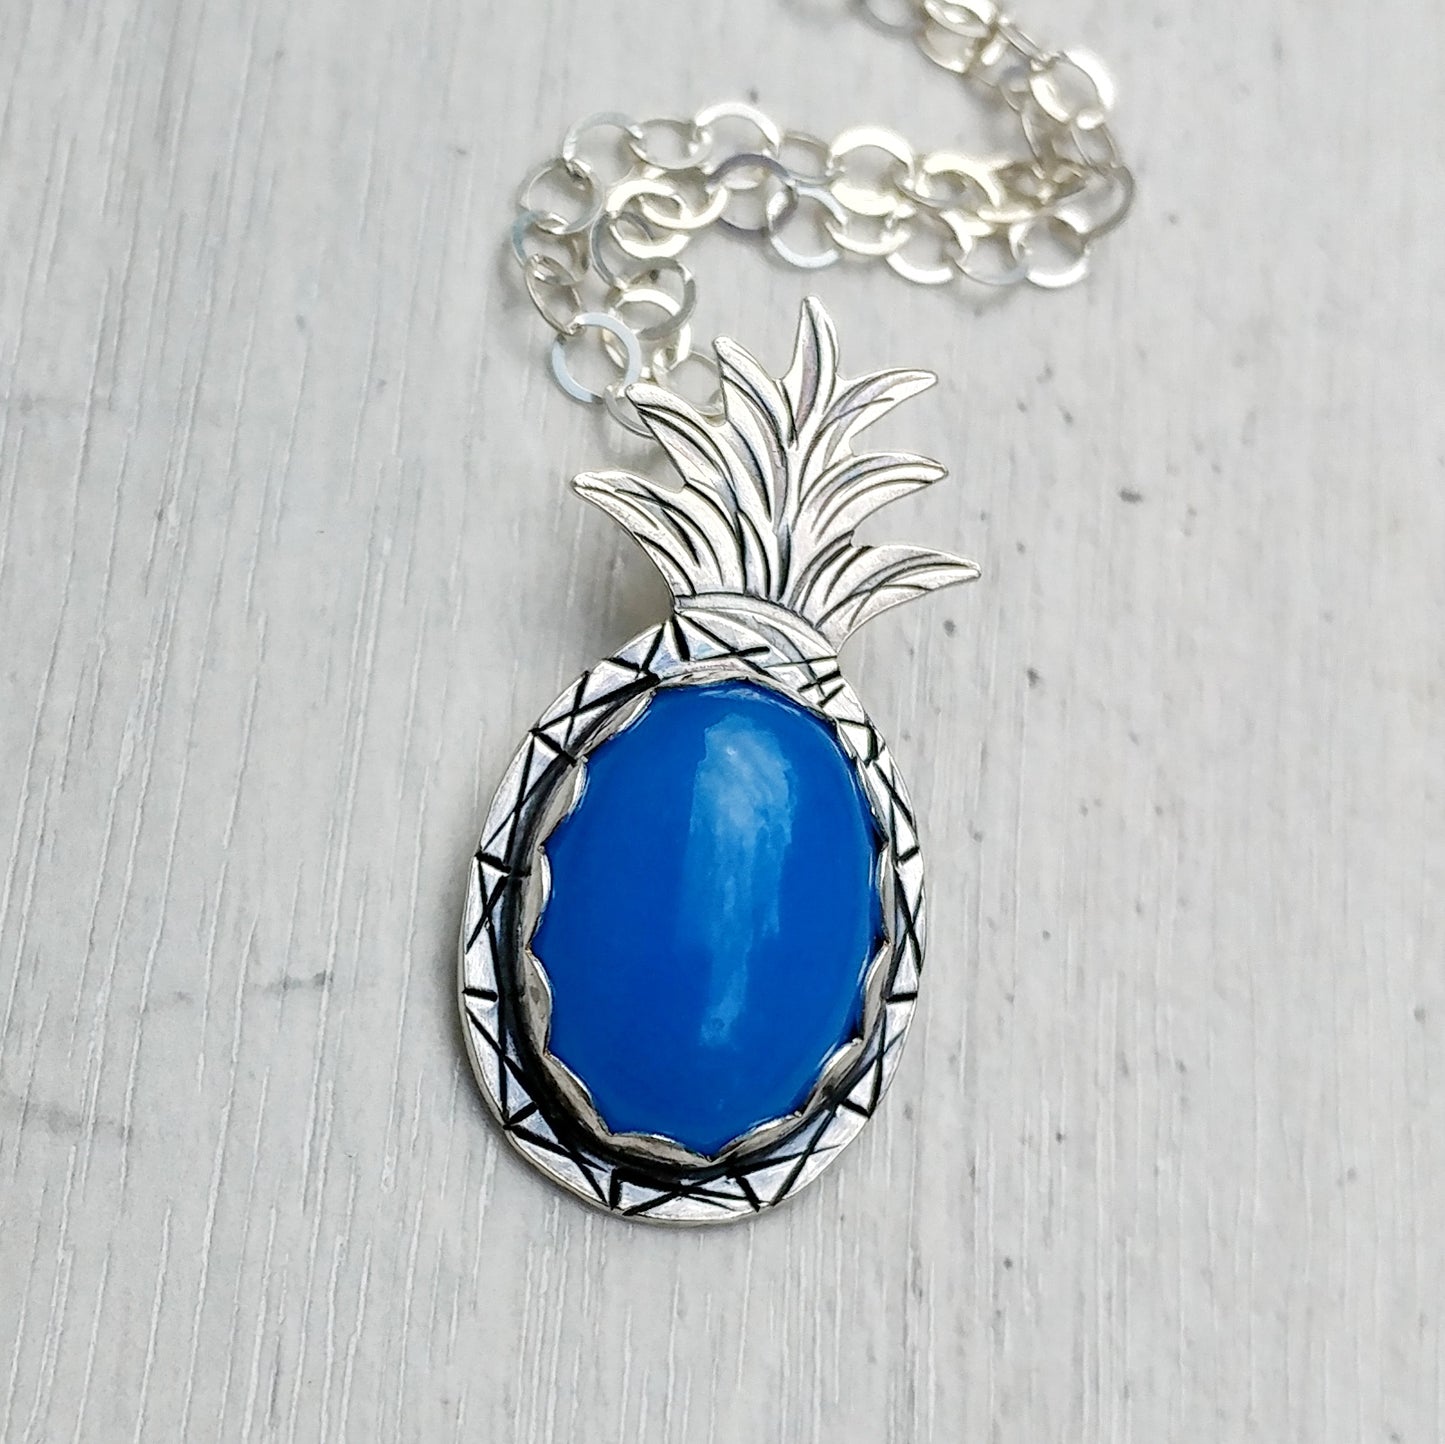 Sterling silver pineapple necklace with blue agate stone